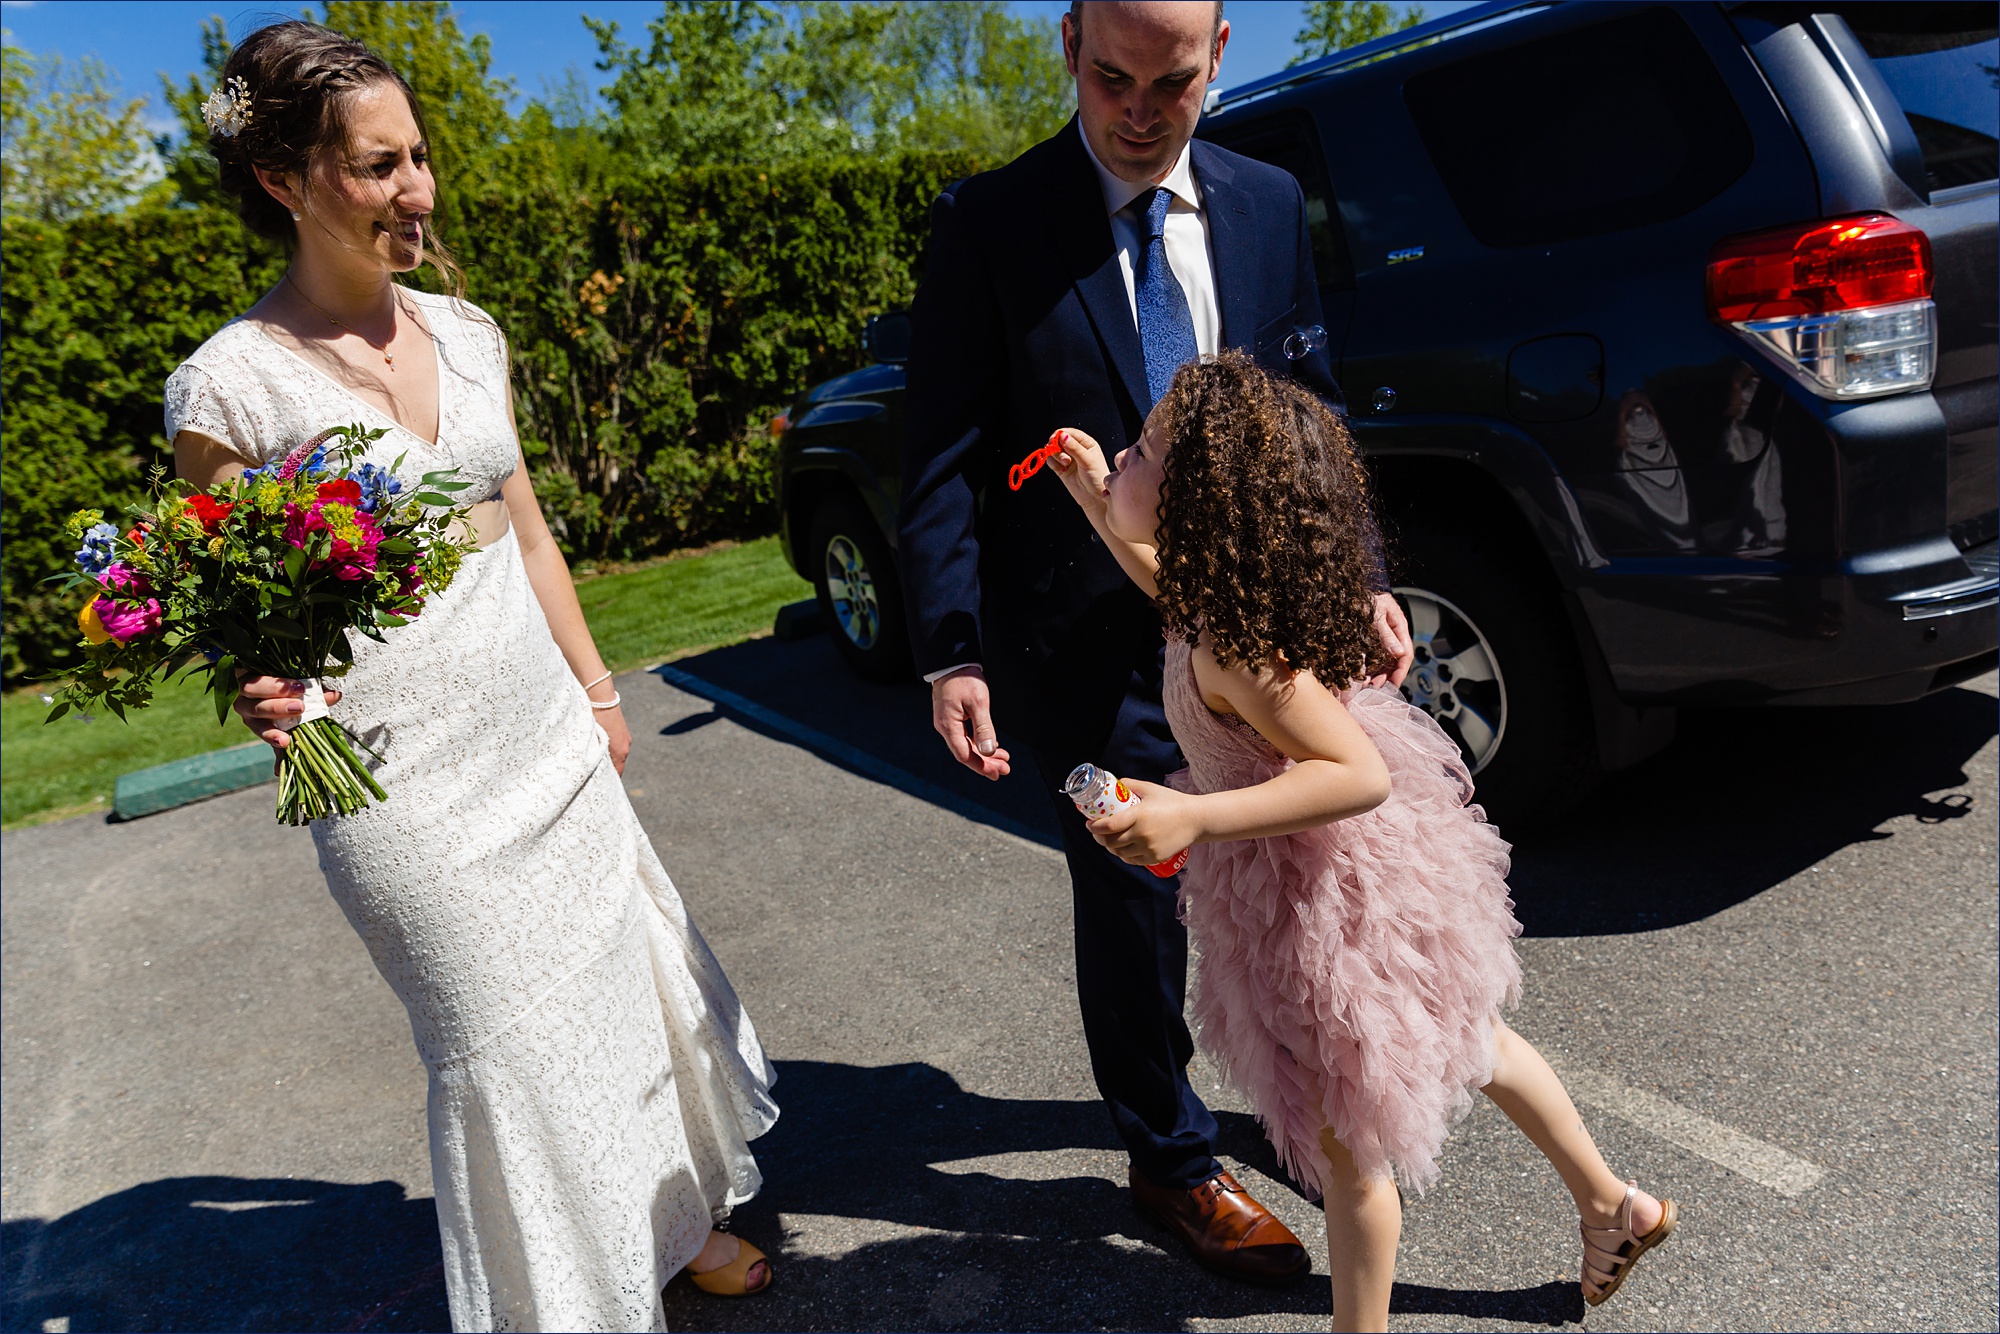 The flower girl blows celebratory bubbles at the newlyweds outside their wedding ceremony